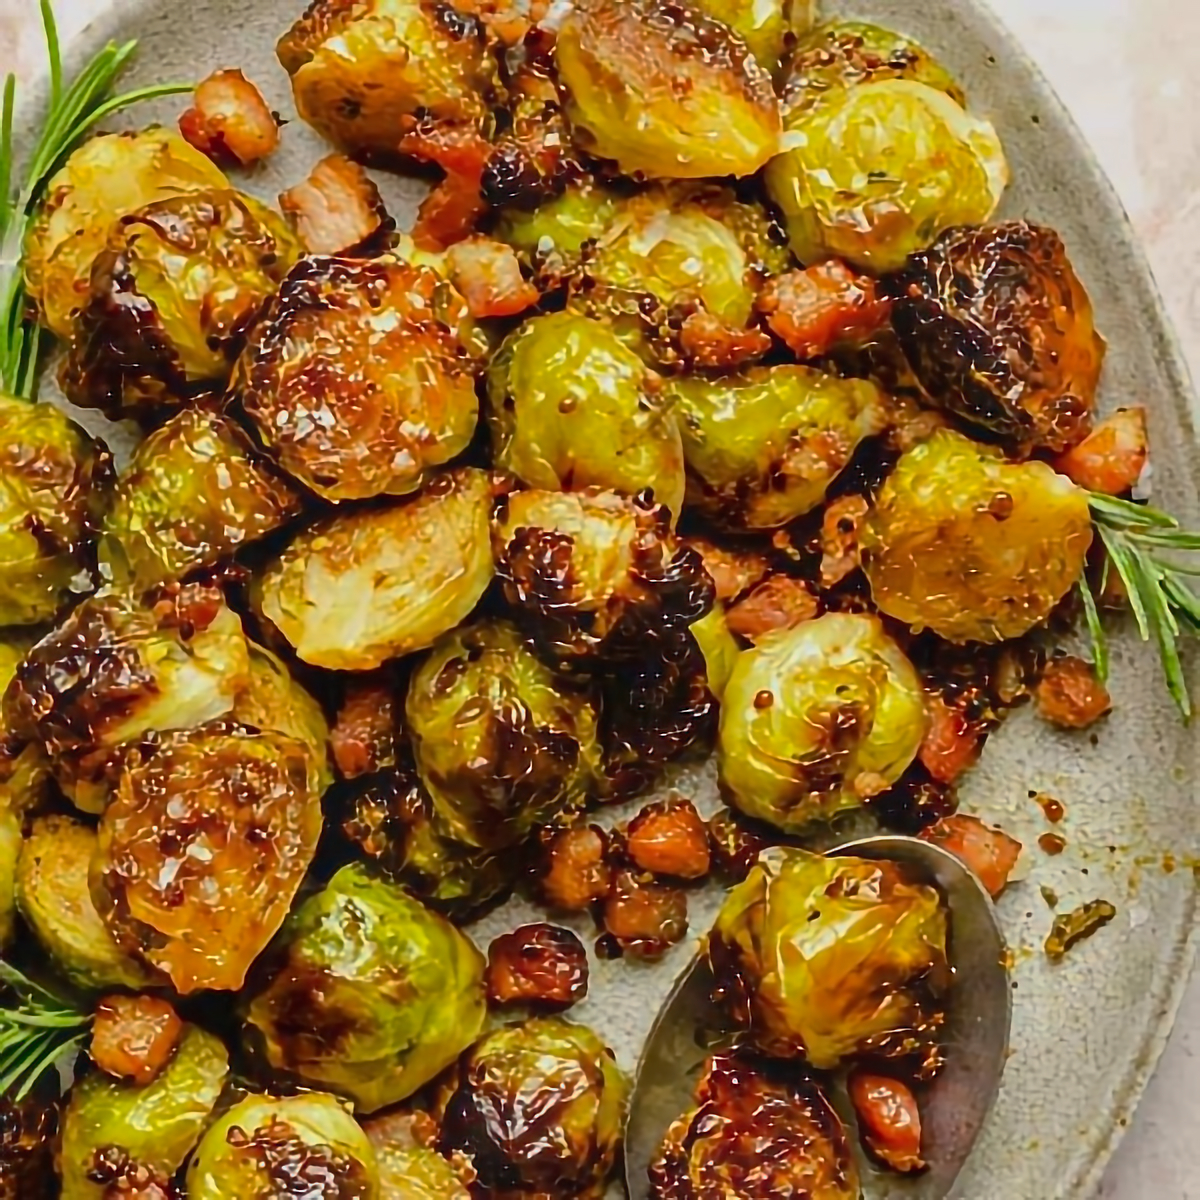 13. Caramelized Brussels Sprouts with Bacon and Maple Syrup - easy brussel sprouts recipes